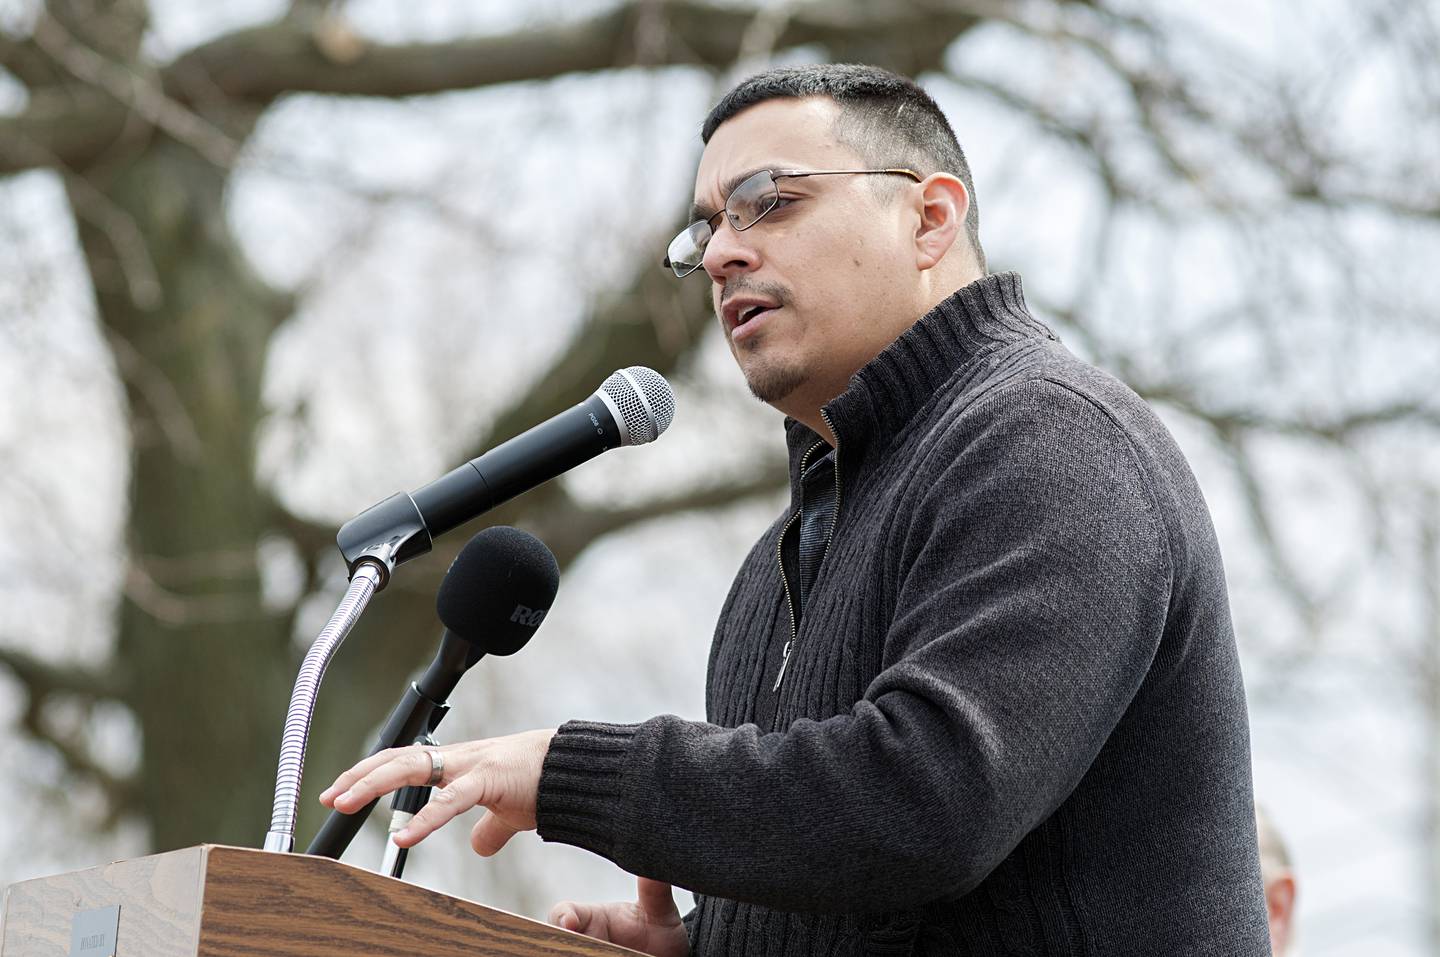 Dixon Mayor Li Arrellano Jr. speaks Thursday about the Gateway Project groundbreaking in Dixon. “All those dominoes falling into place truly, truly took a team effort,” Arellano said.